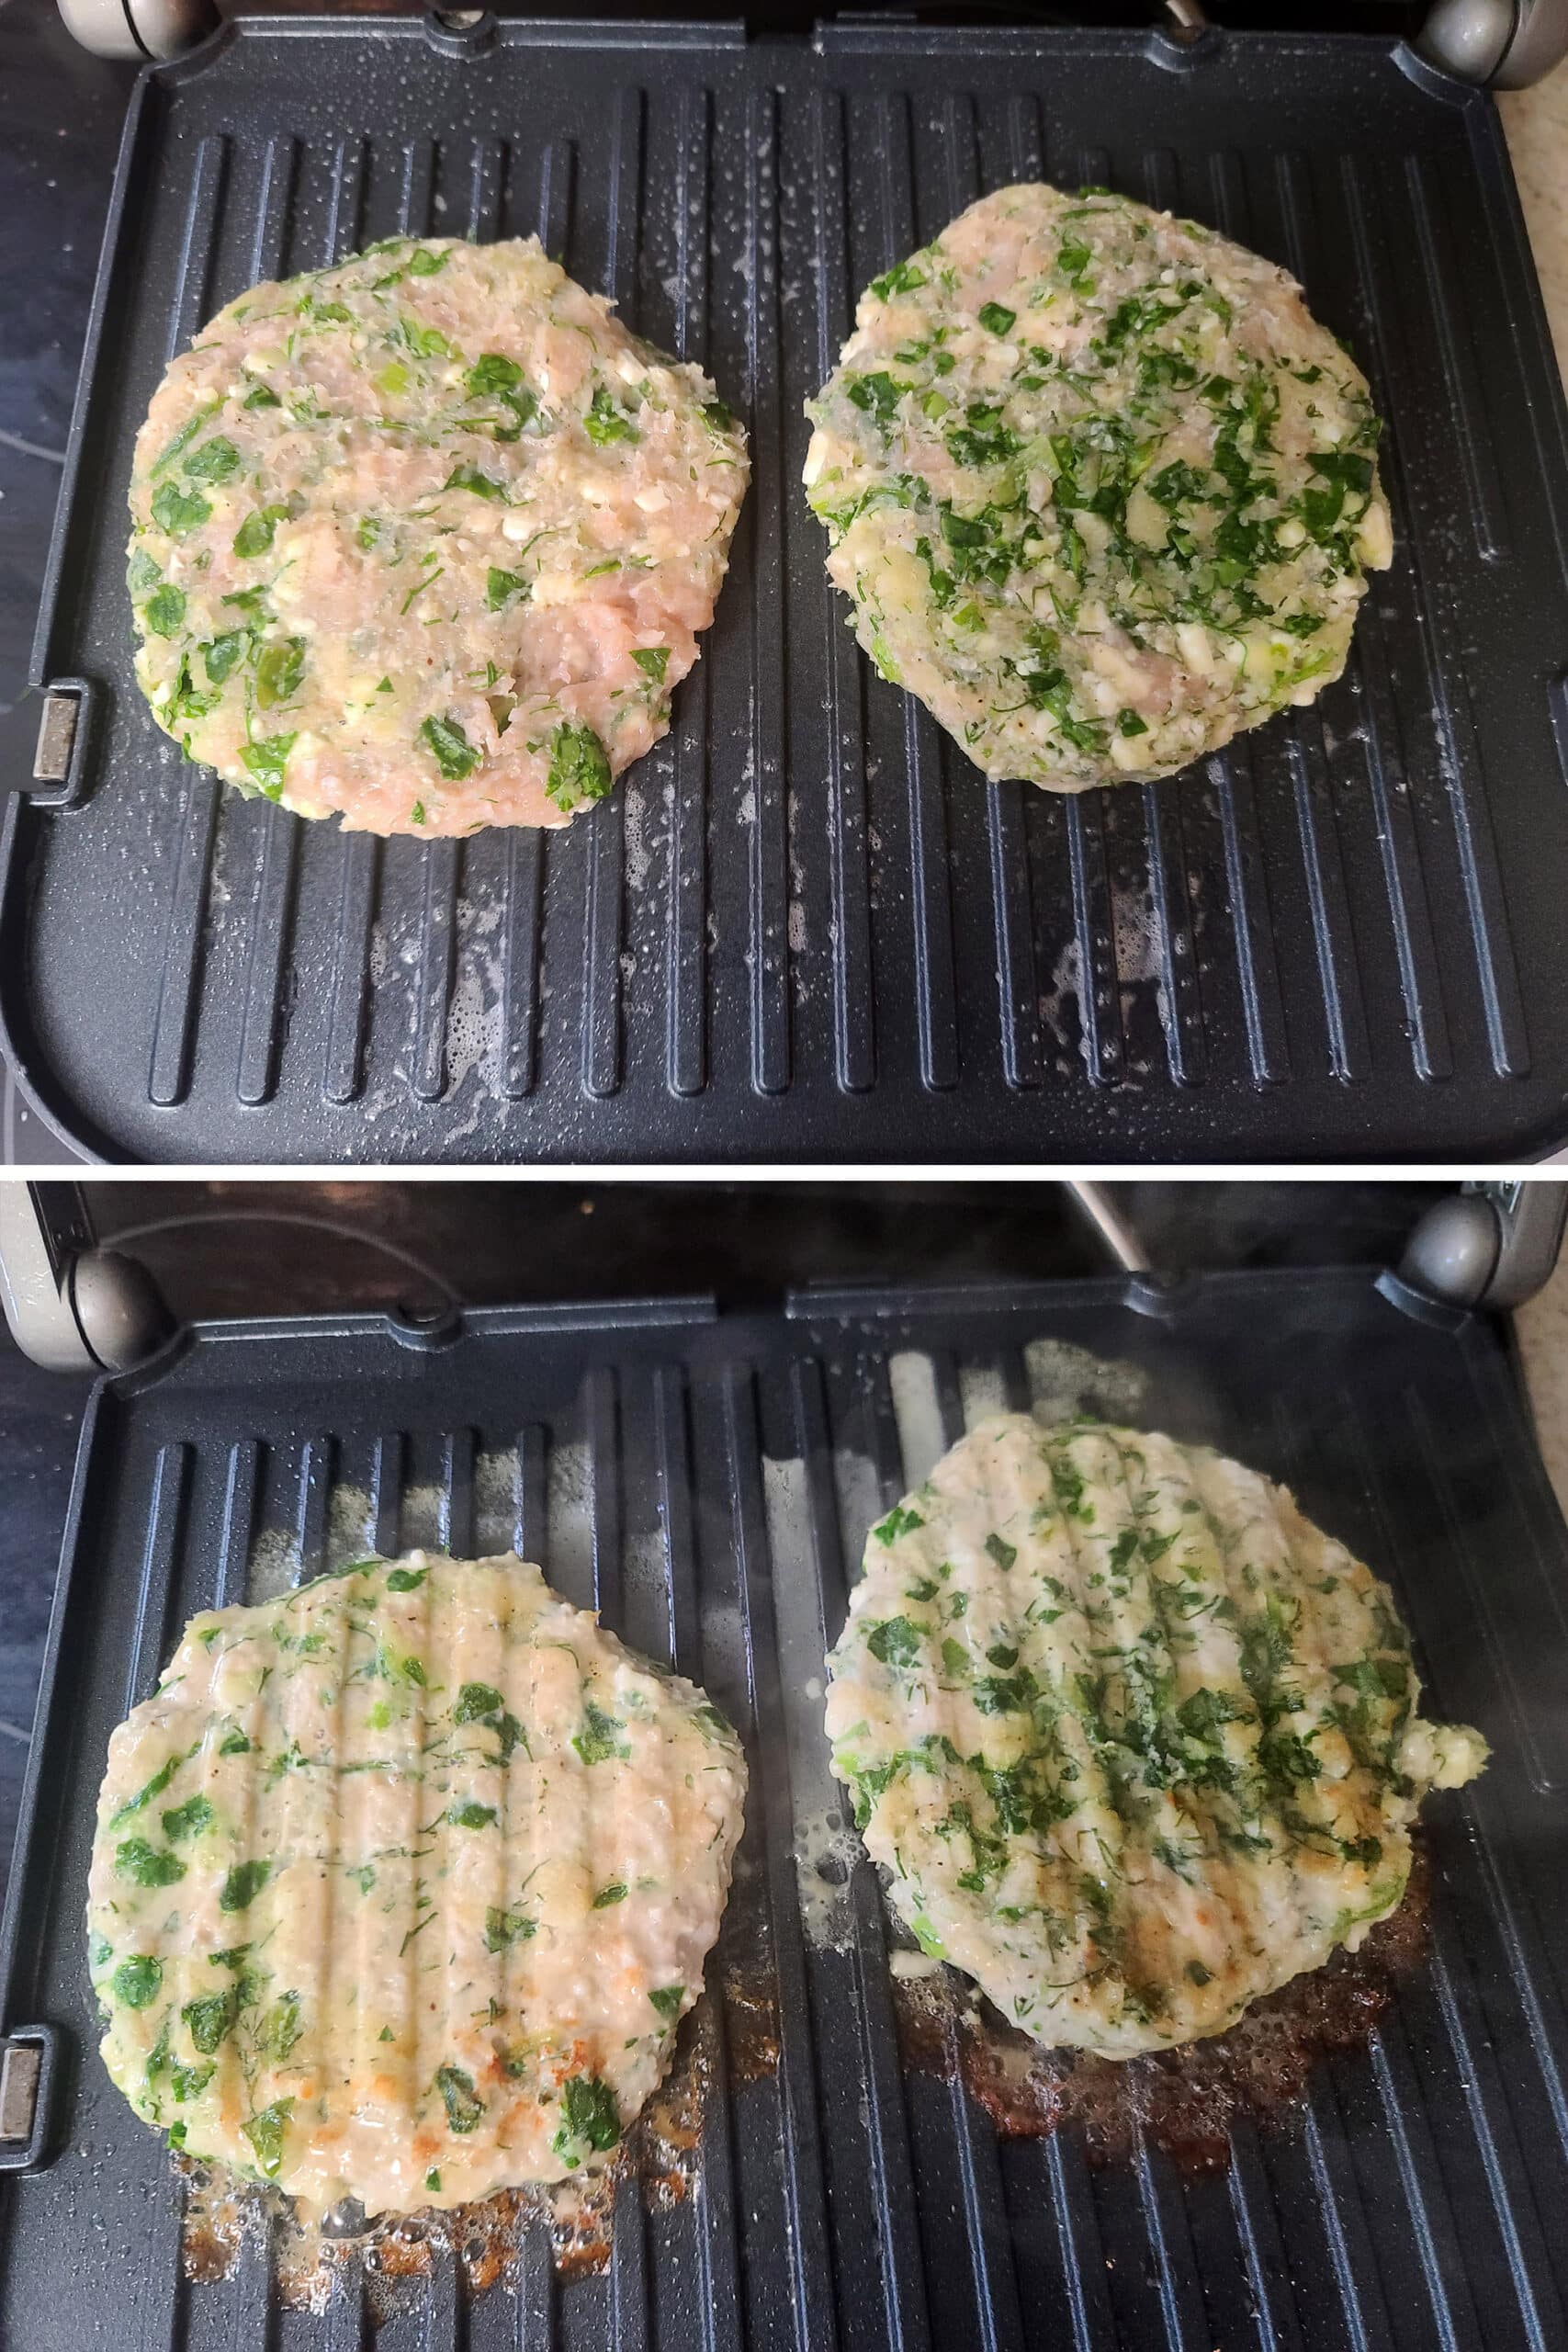 2 part image showing the Mediterranean chicken burgers cooking on an indoor grill.